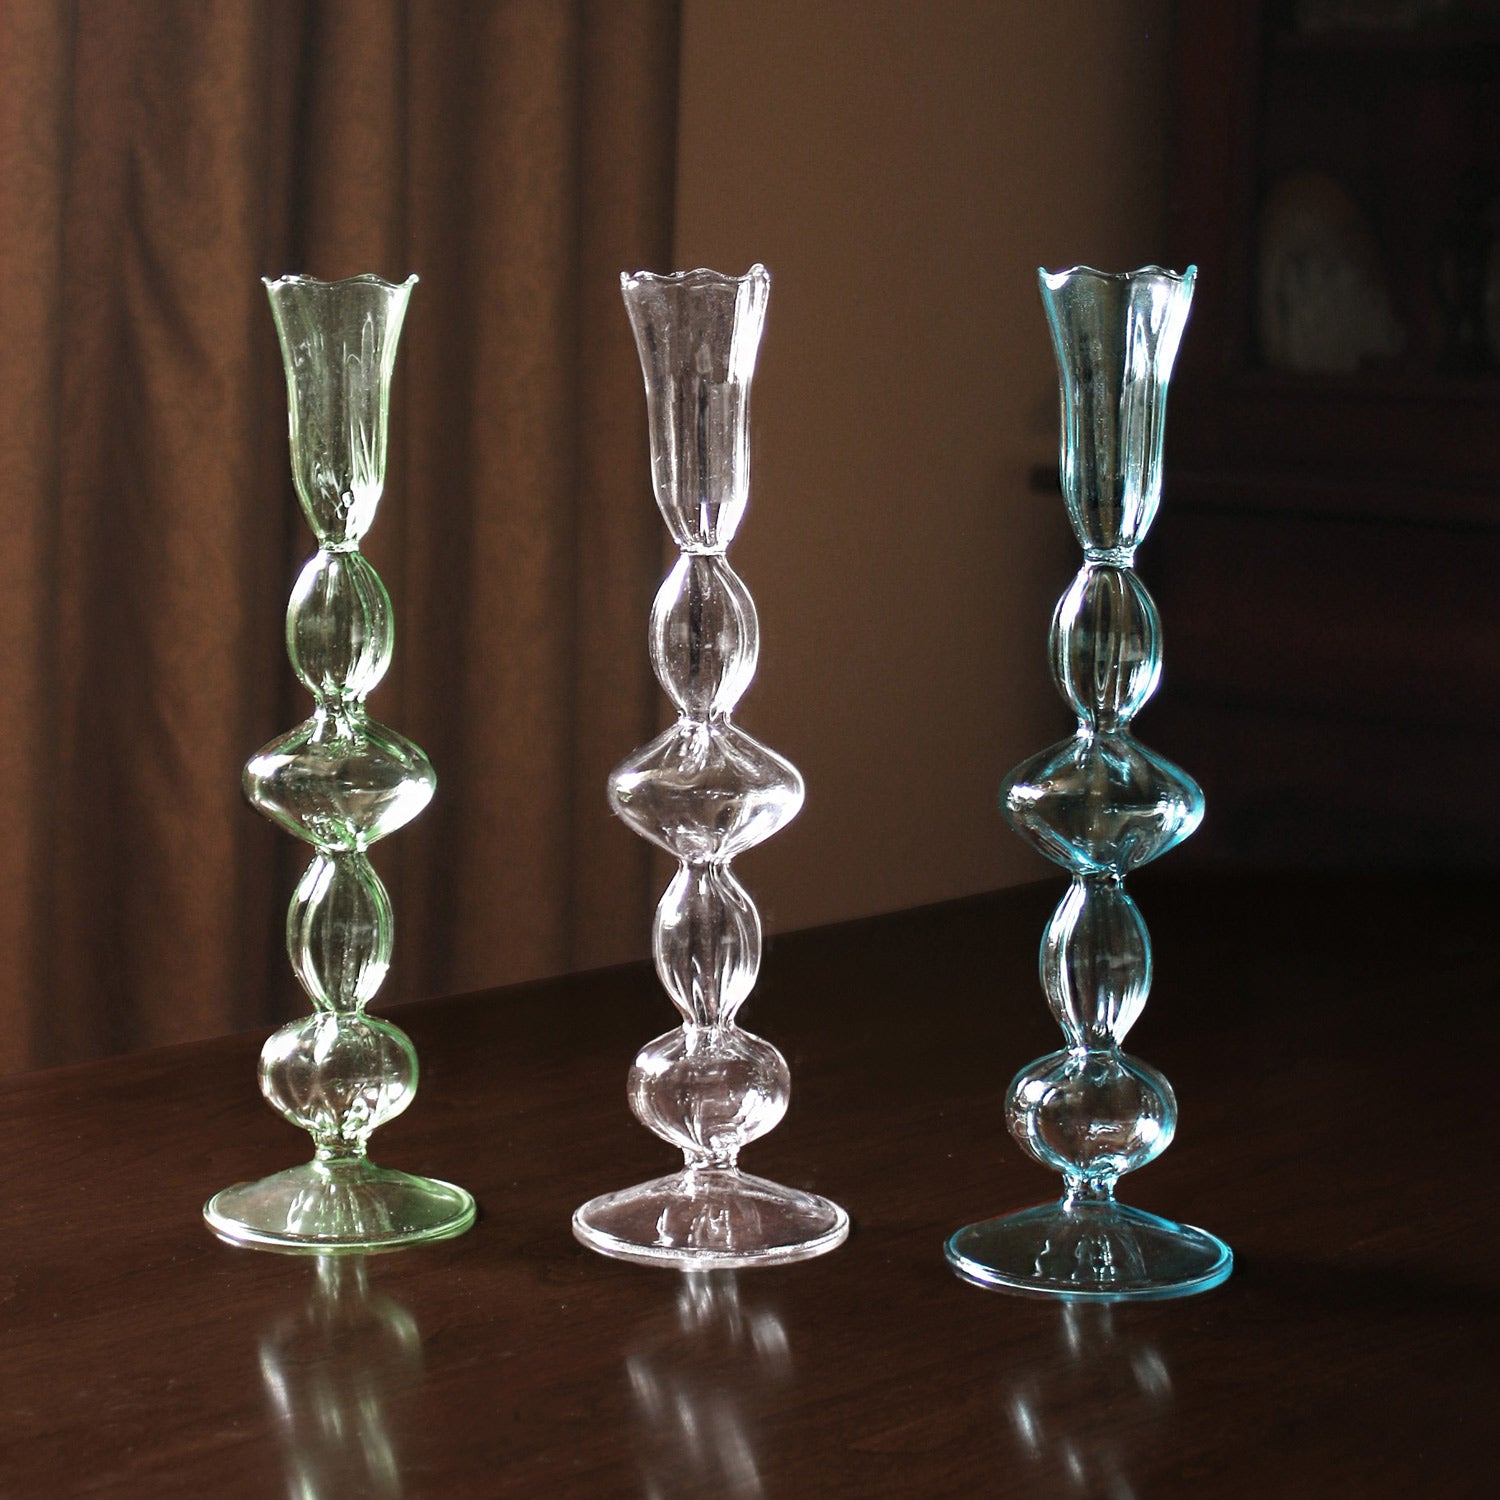 GLASS Blossoms Candlestick Holder Set of 2 (Clear)